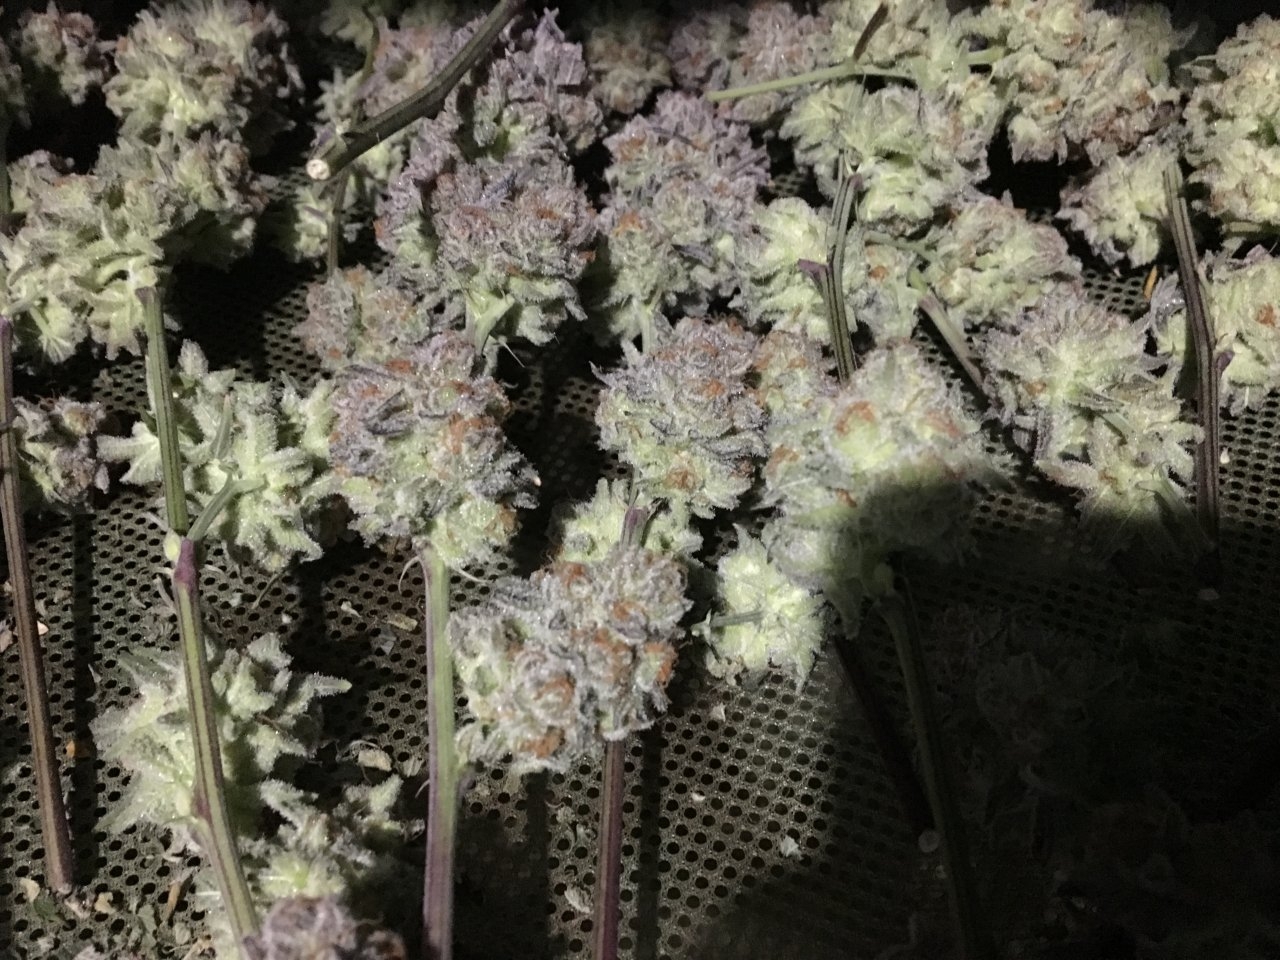 Purple Punch color on display